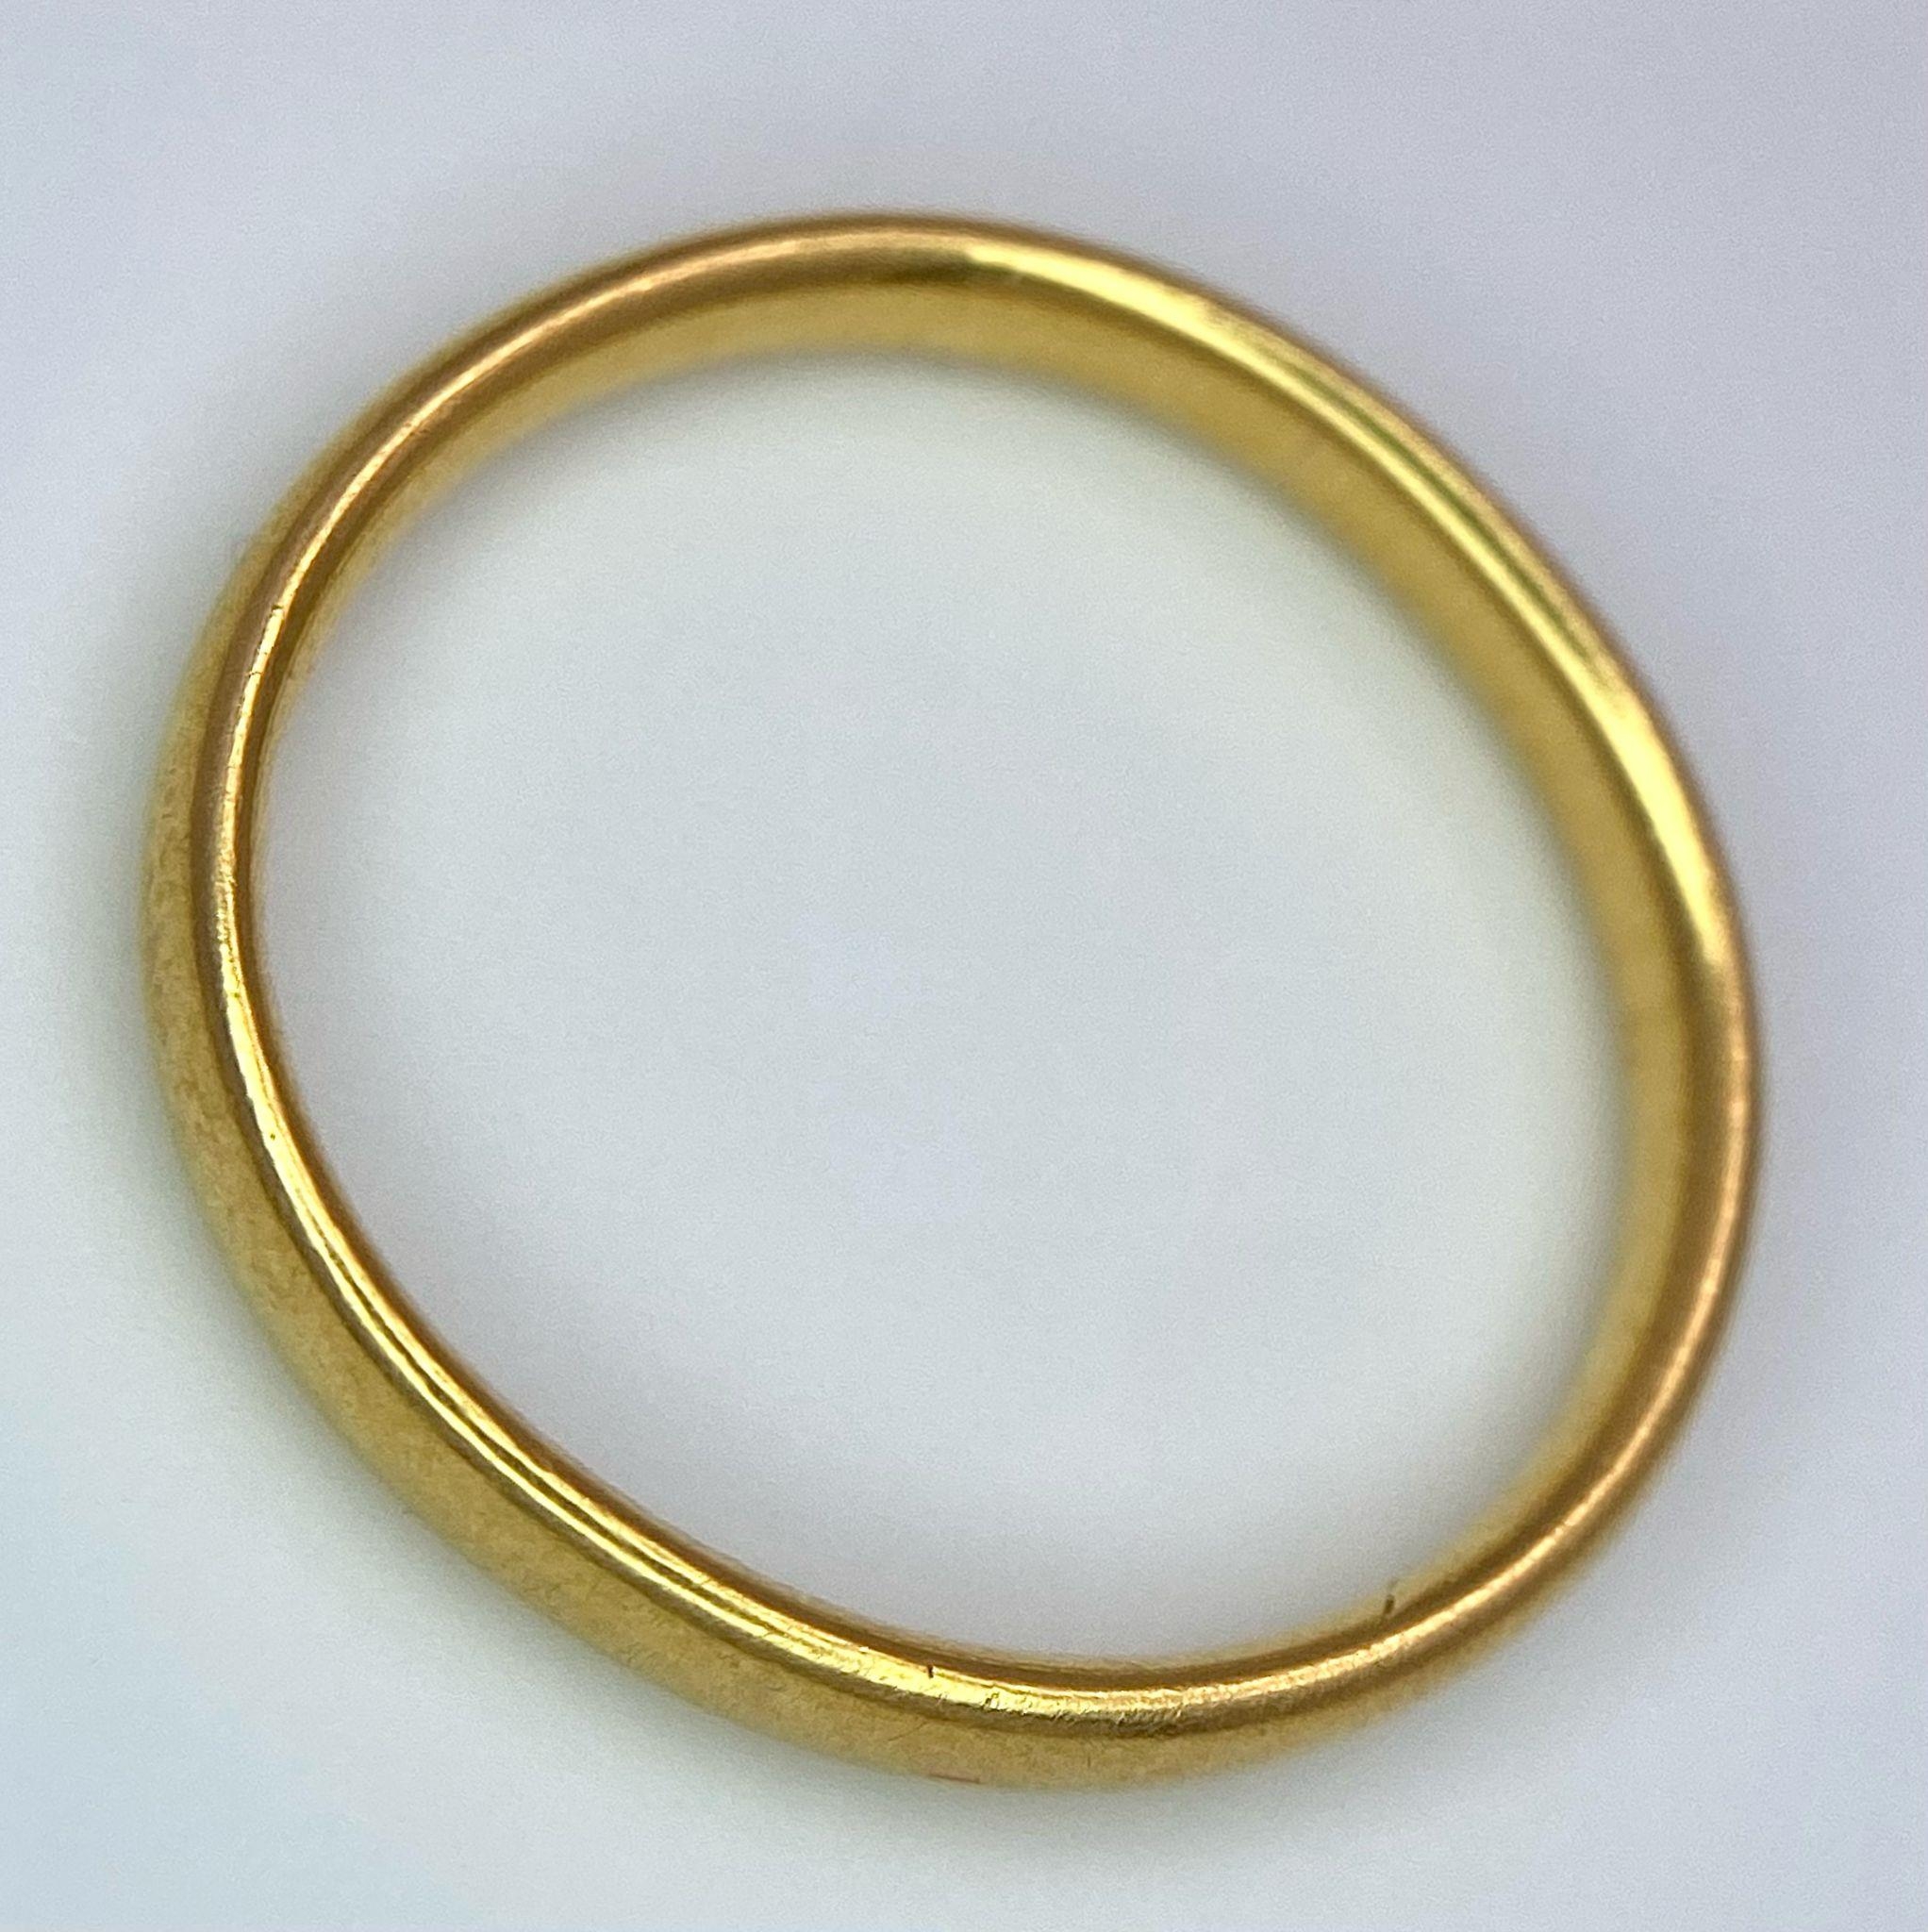 A Vintage 22k Yellow Gold Band Ring. 3mm width. Size L. 2.85g weight. Full UK hallmarks. - Image 3 of 4